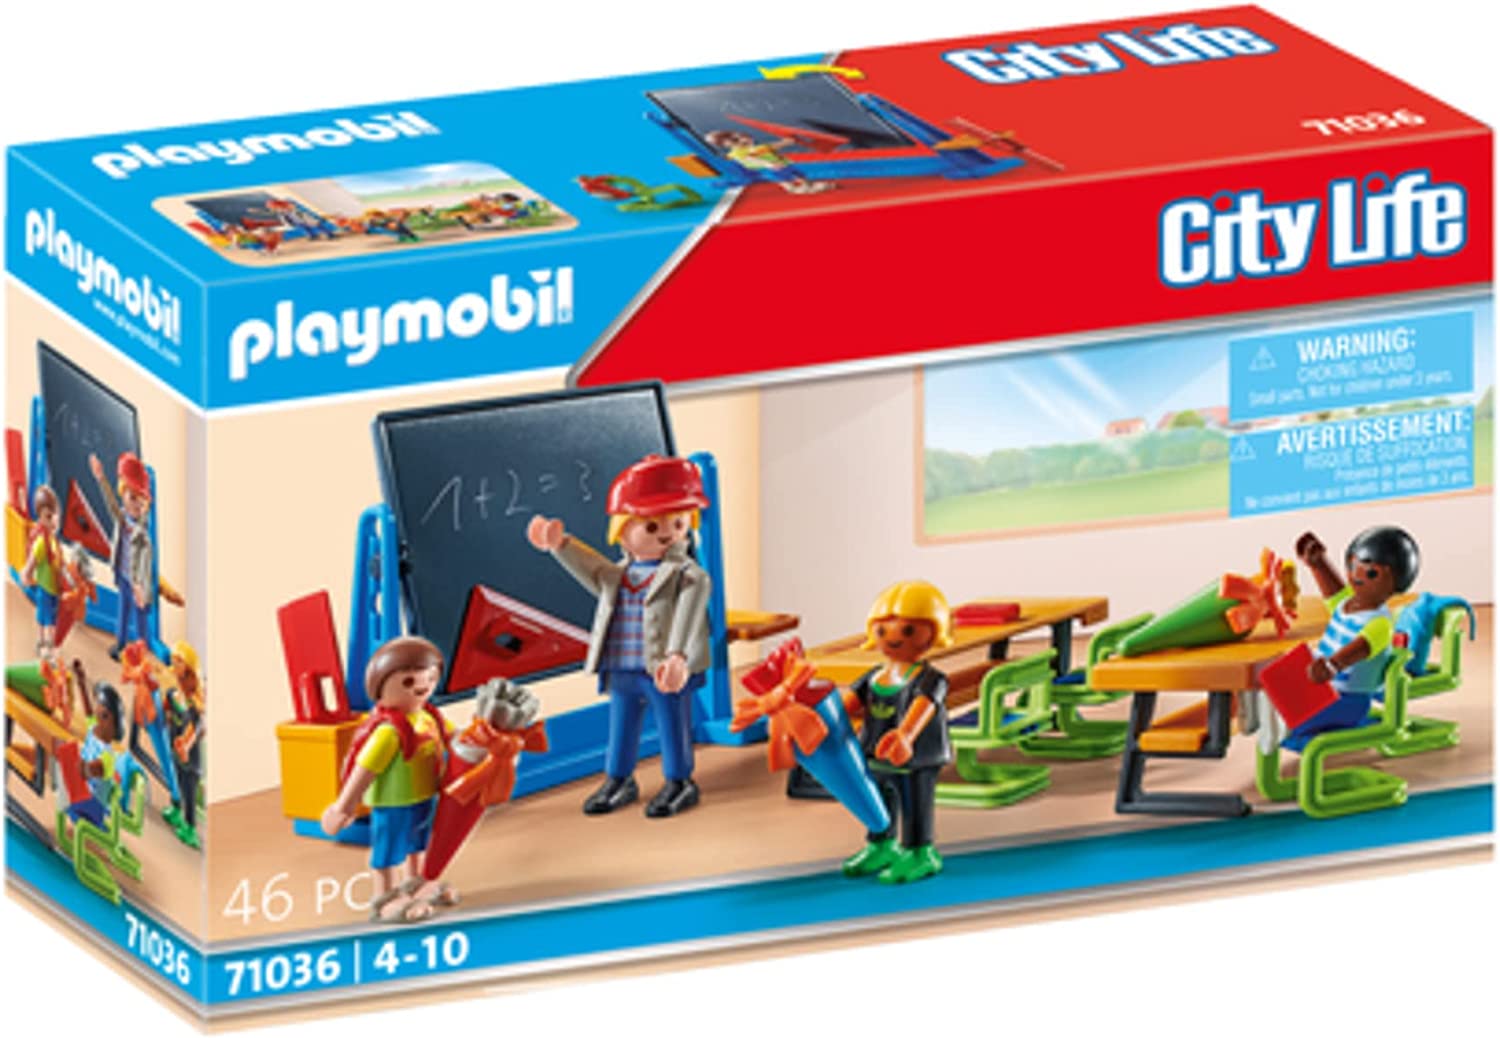 PLAYMOBIL City Life 71036 First Day of School, Recommended from 4 Years